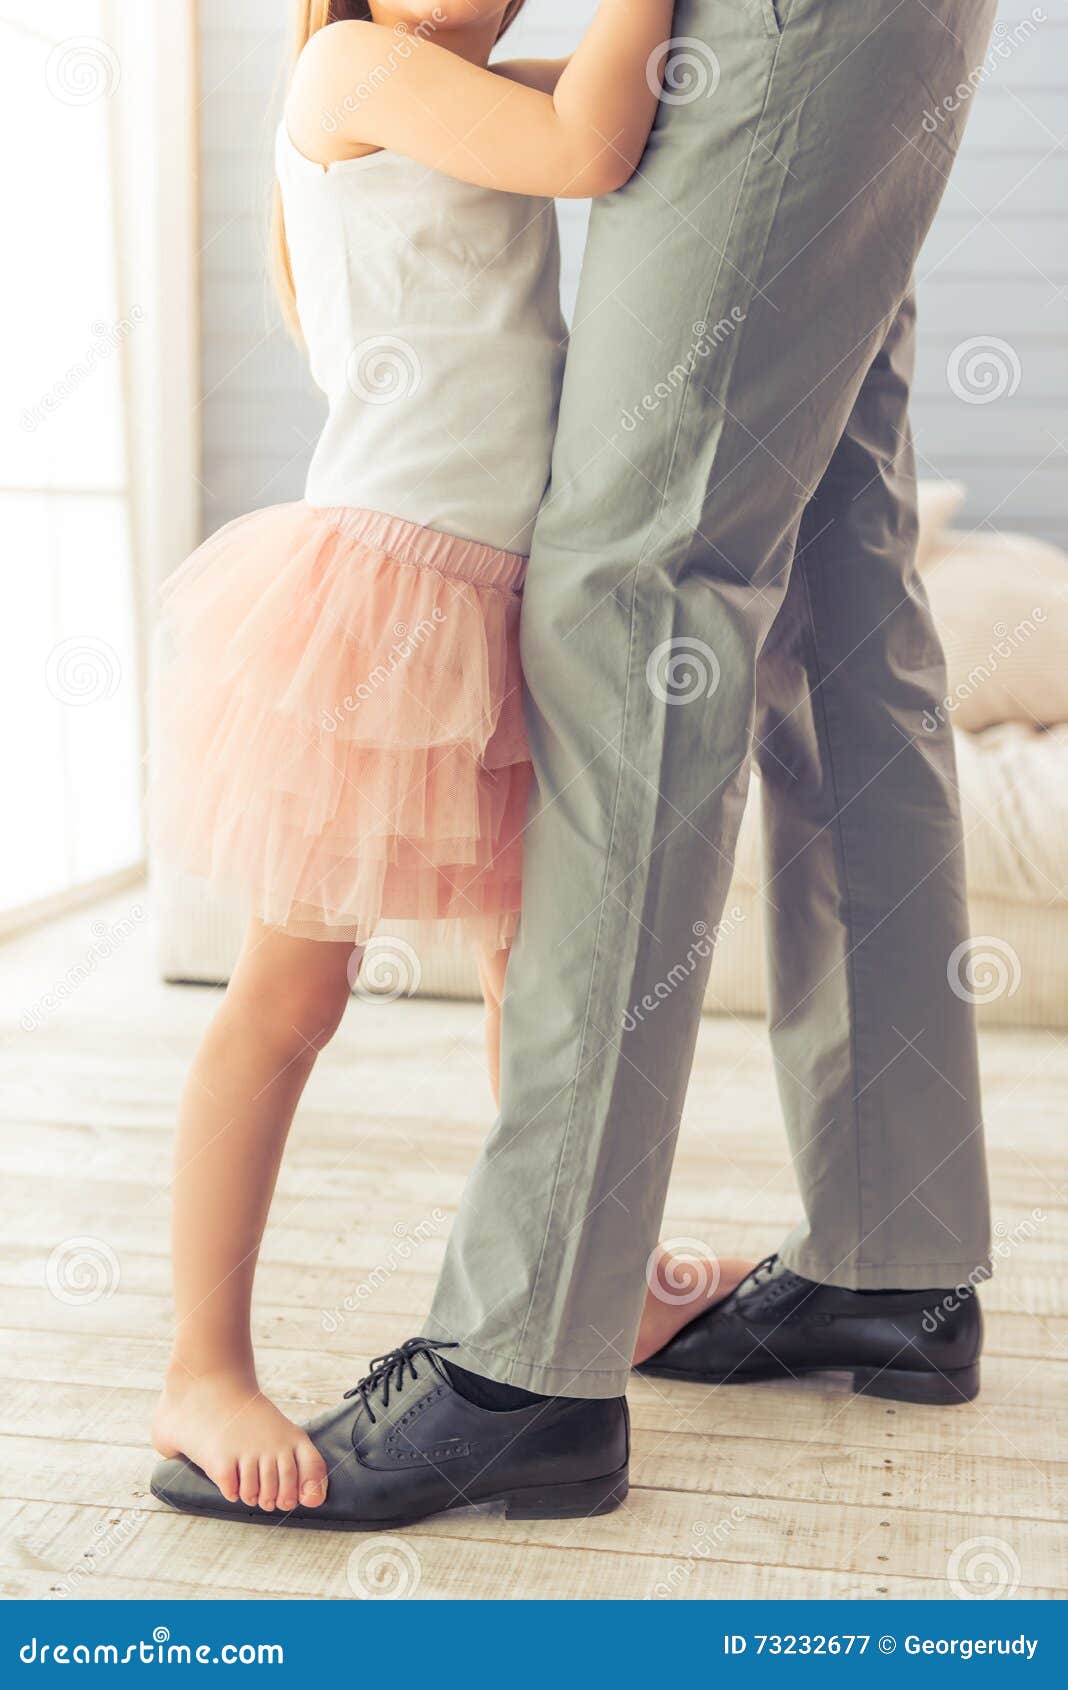 Father and daughter stock image